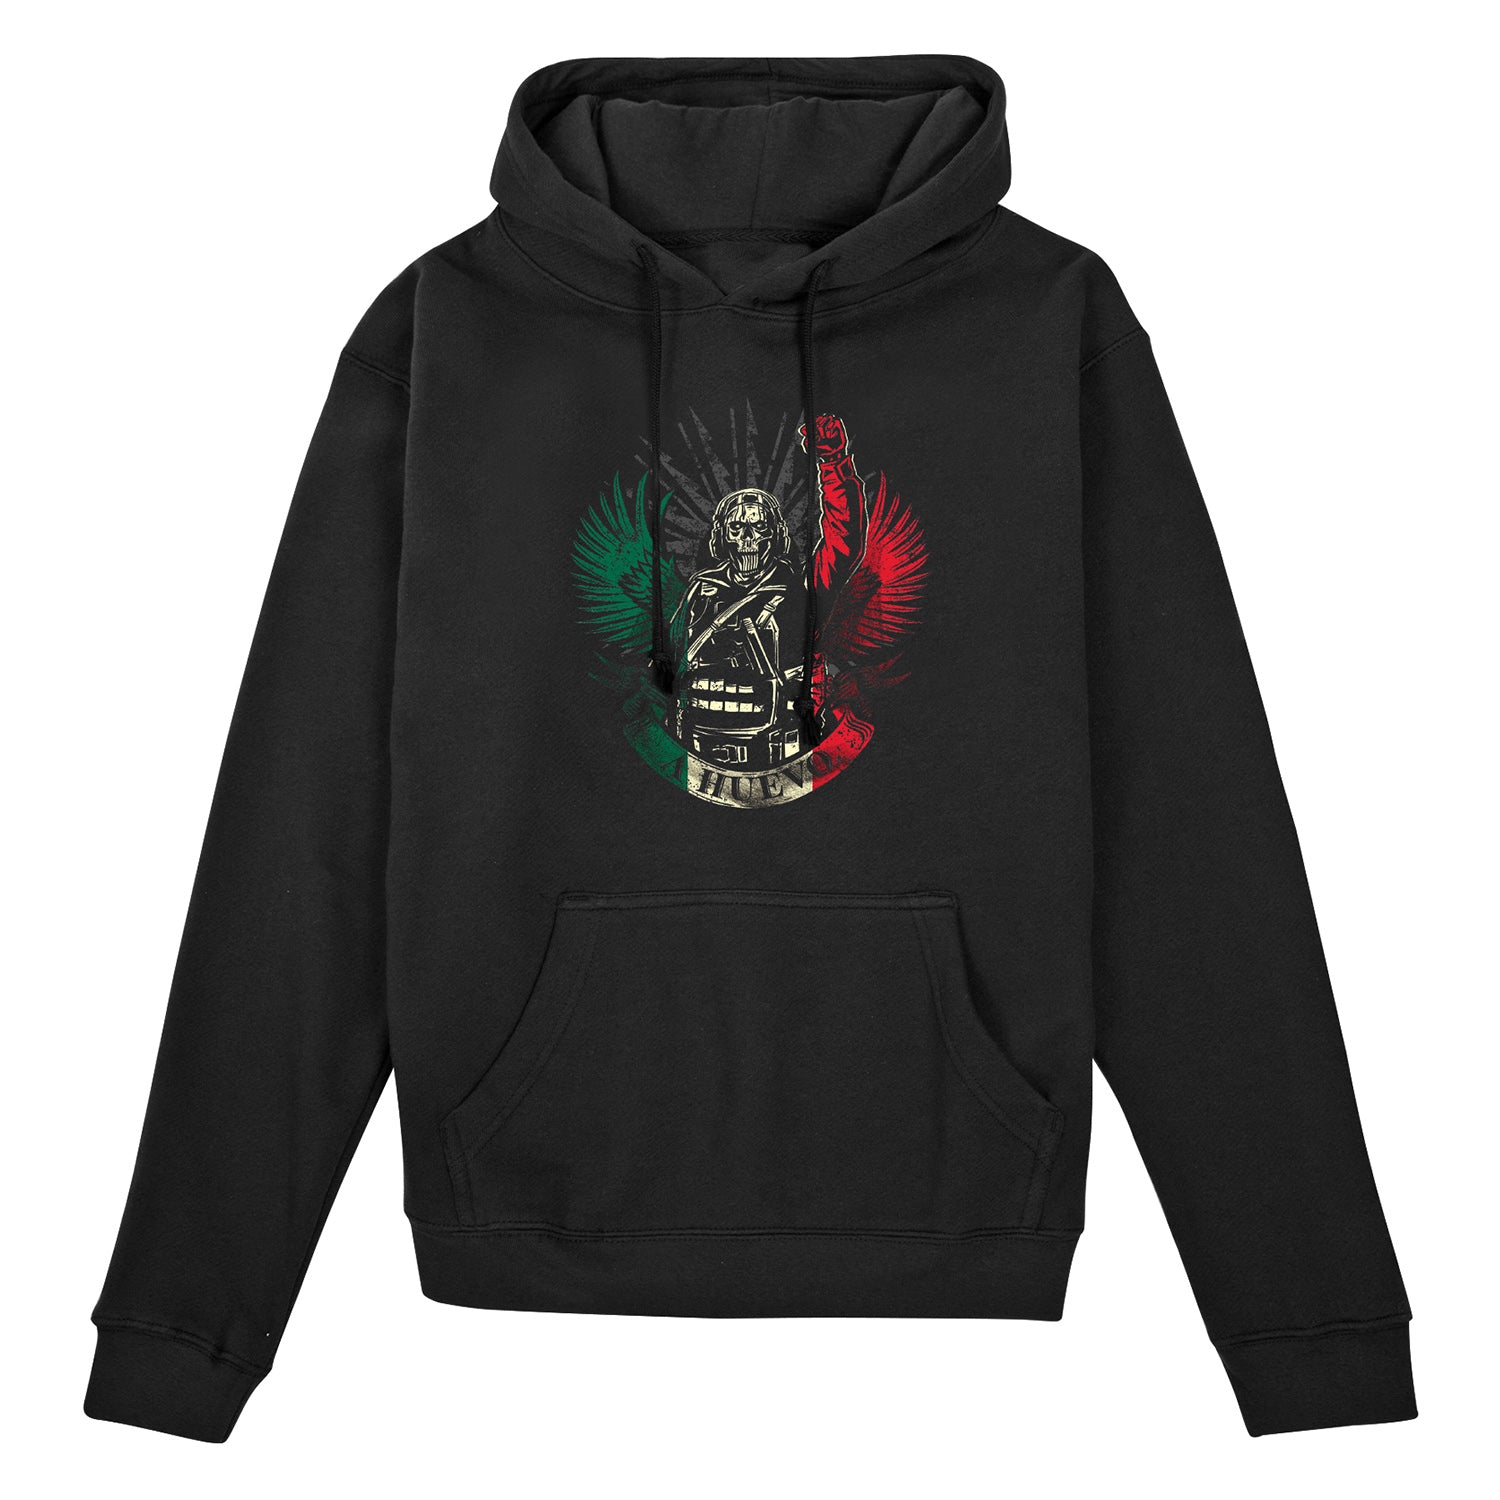 Call of Duty Black "A Huevo" Campaign Hoodie Front View